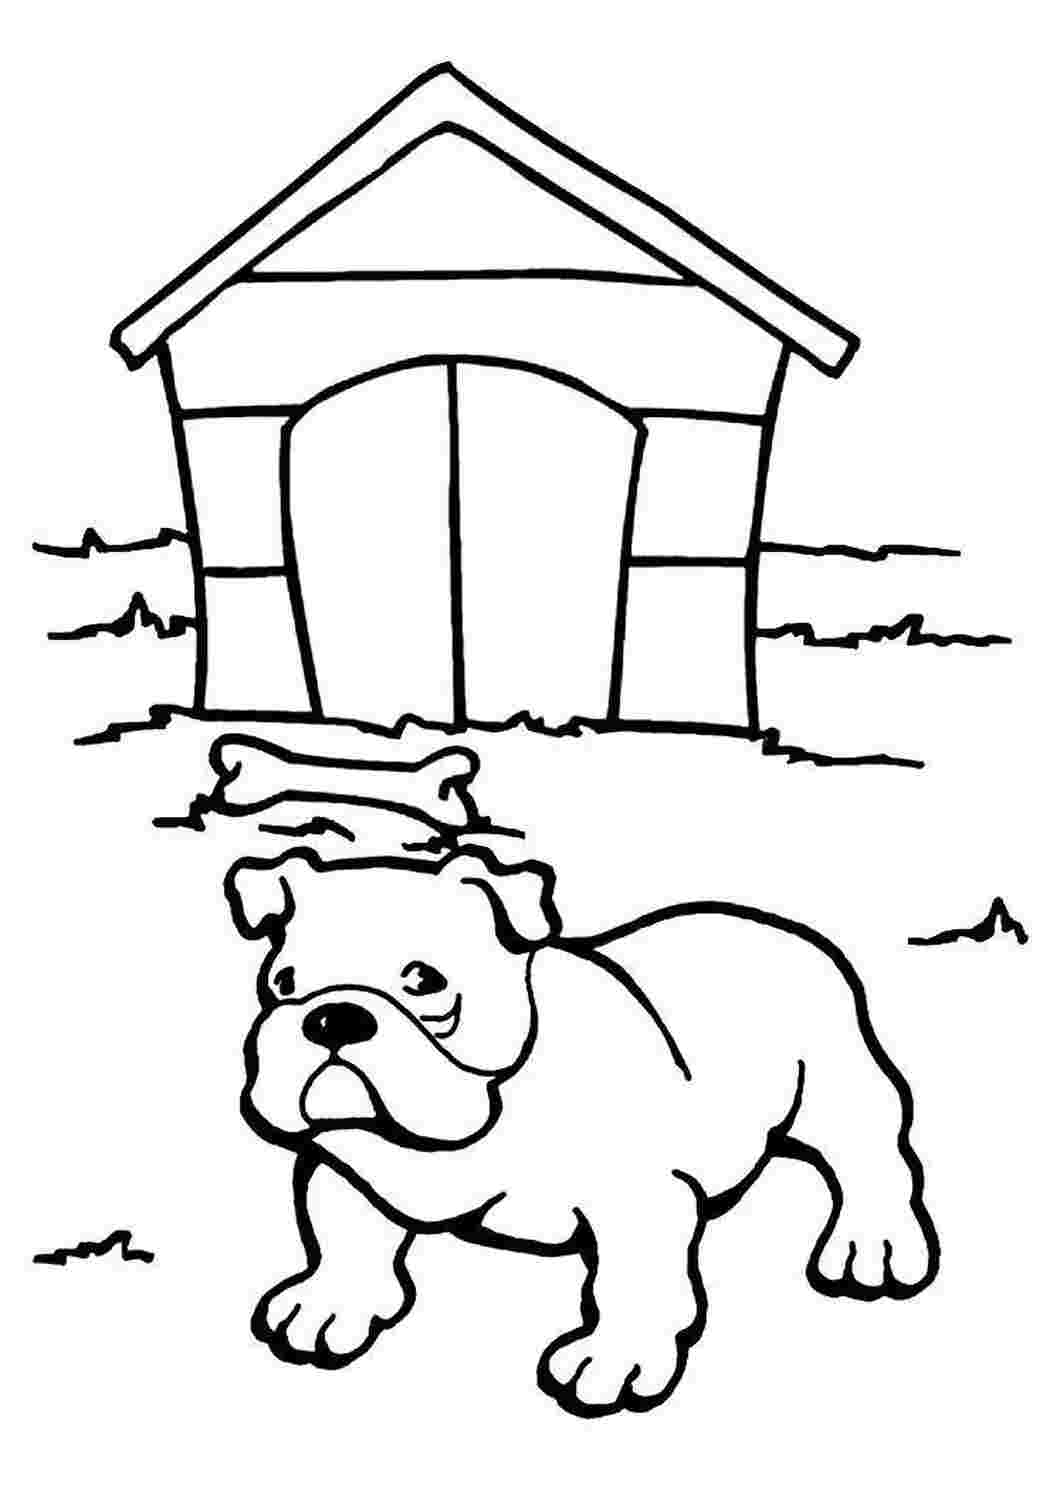 Related coloring pages of Chihuahua